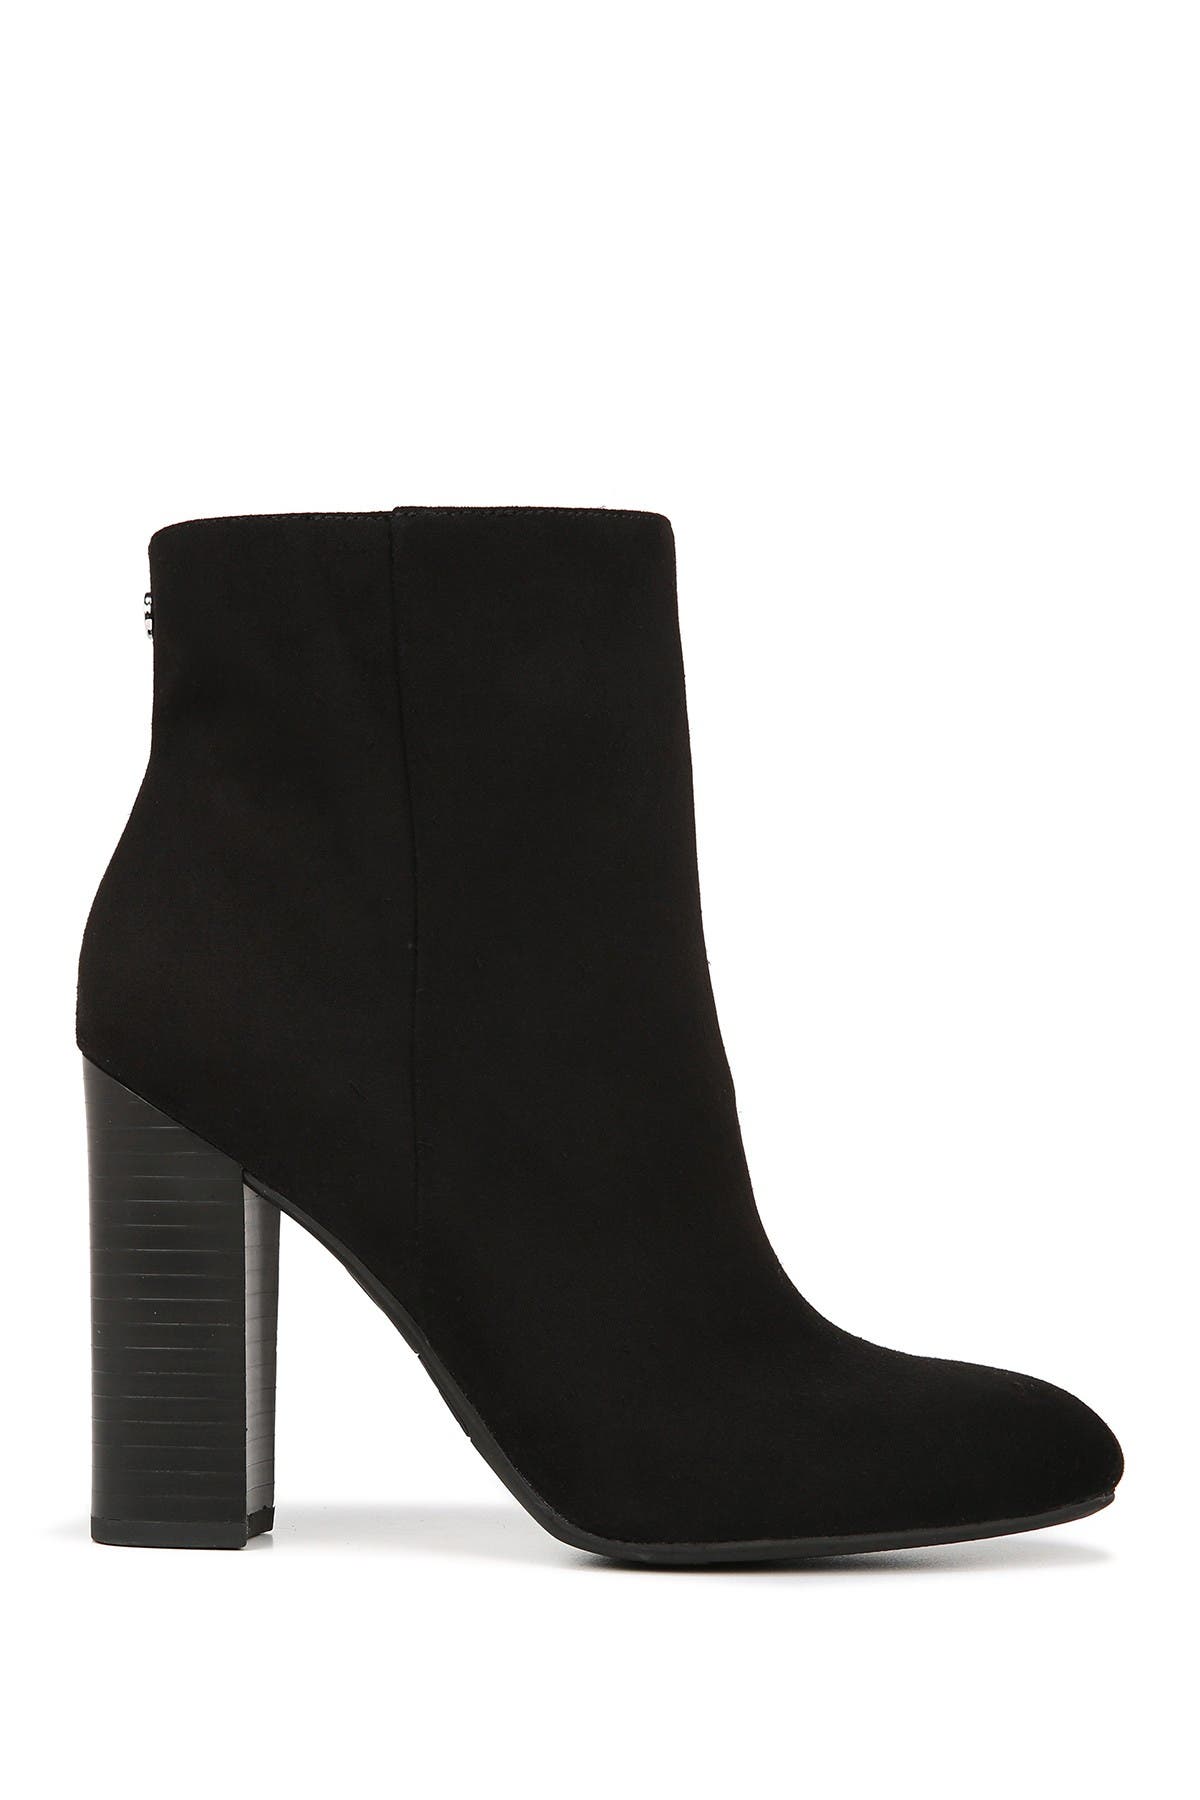 circus by sam edelman connelly booties